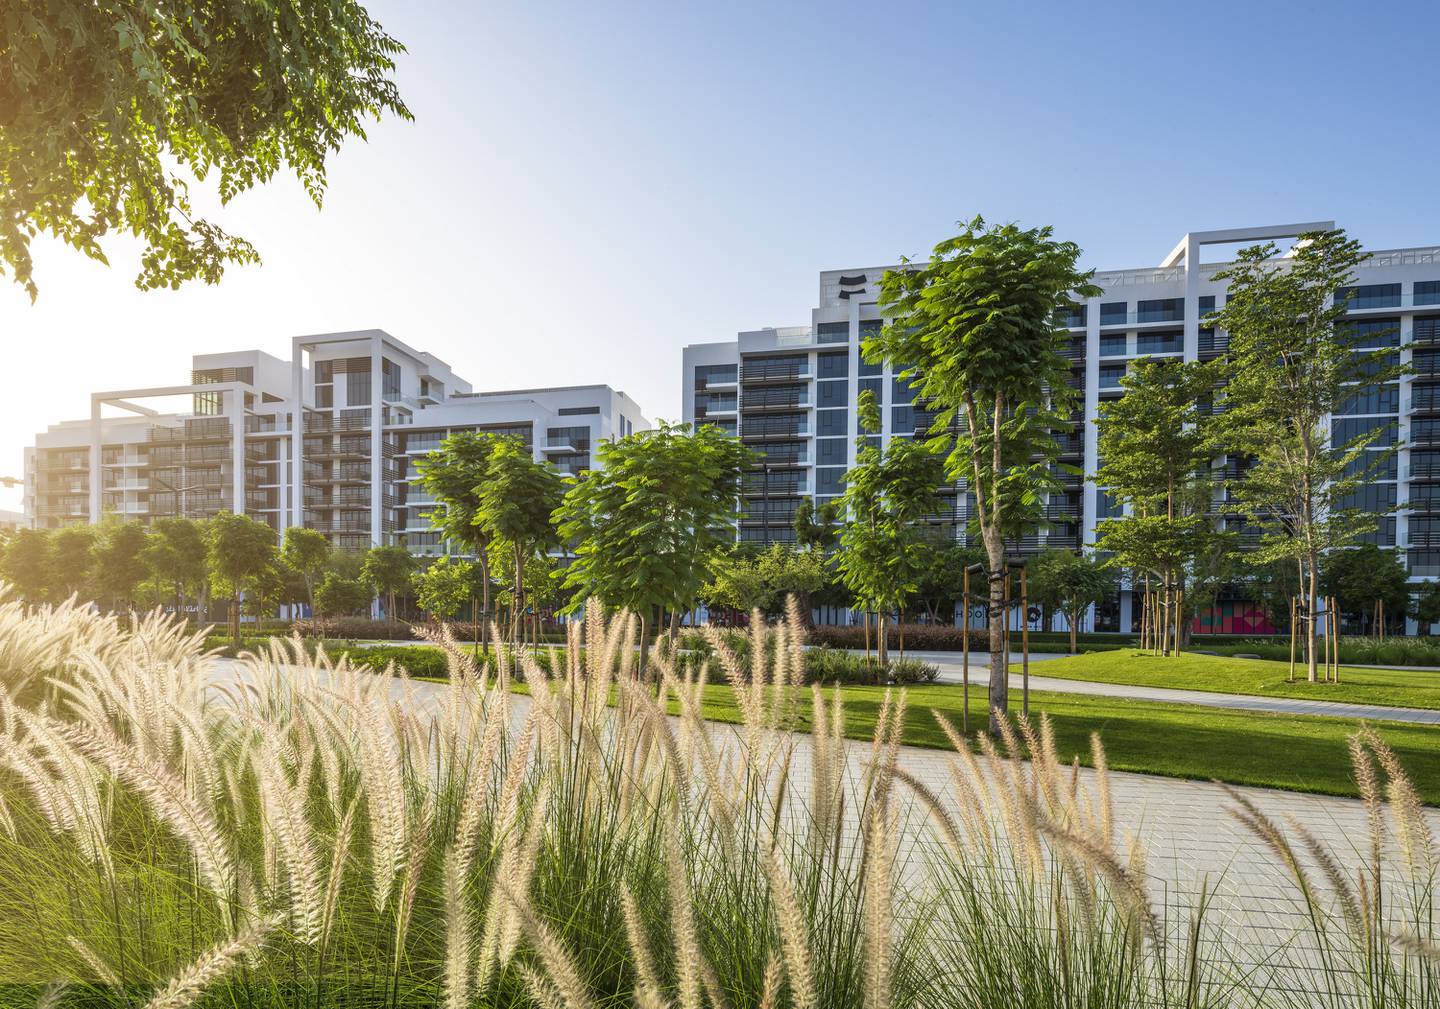 Misk Apartments in Sharjah have views over a park with more than 5,000 trees, including the local ghaf. Photo: Arada